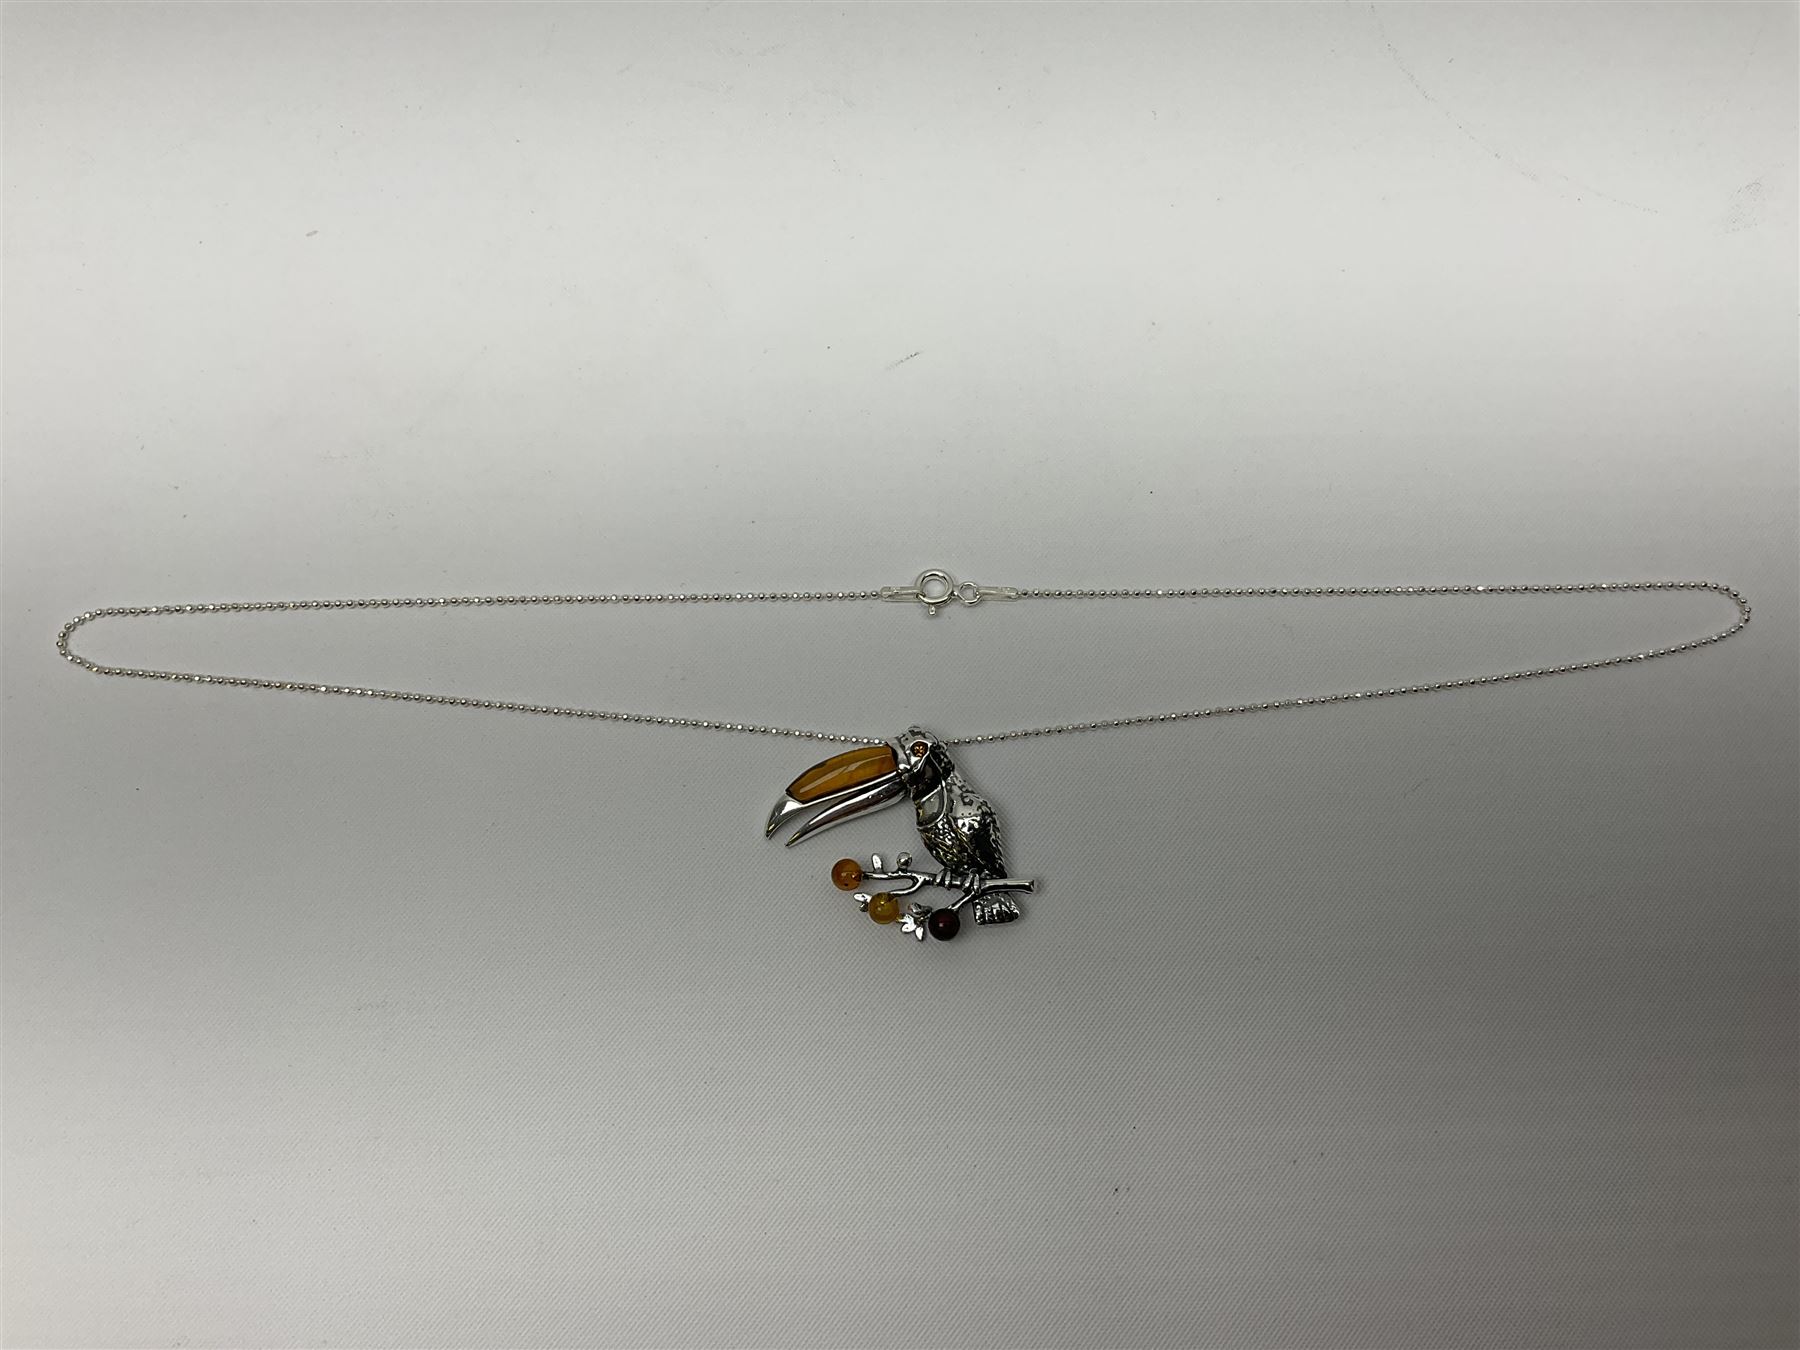 Silver Baltic amber toucan pendant necklace - Image 2 of 3